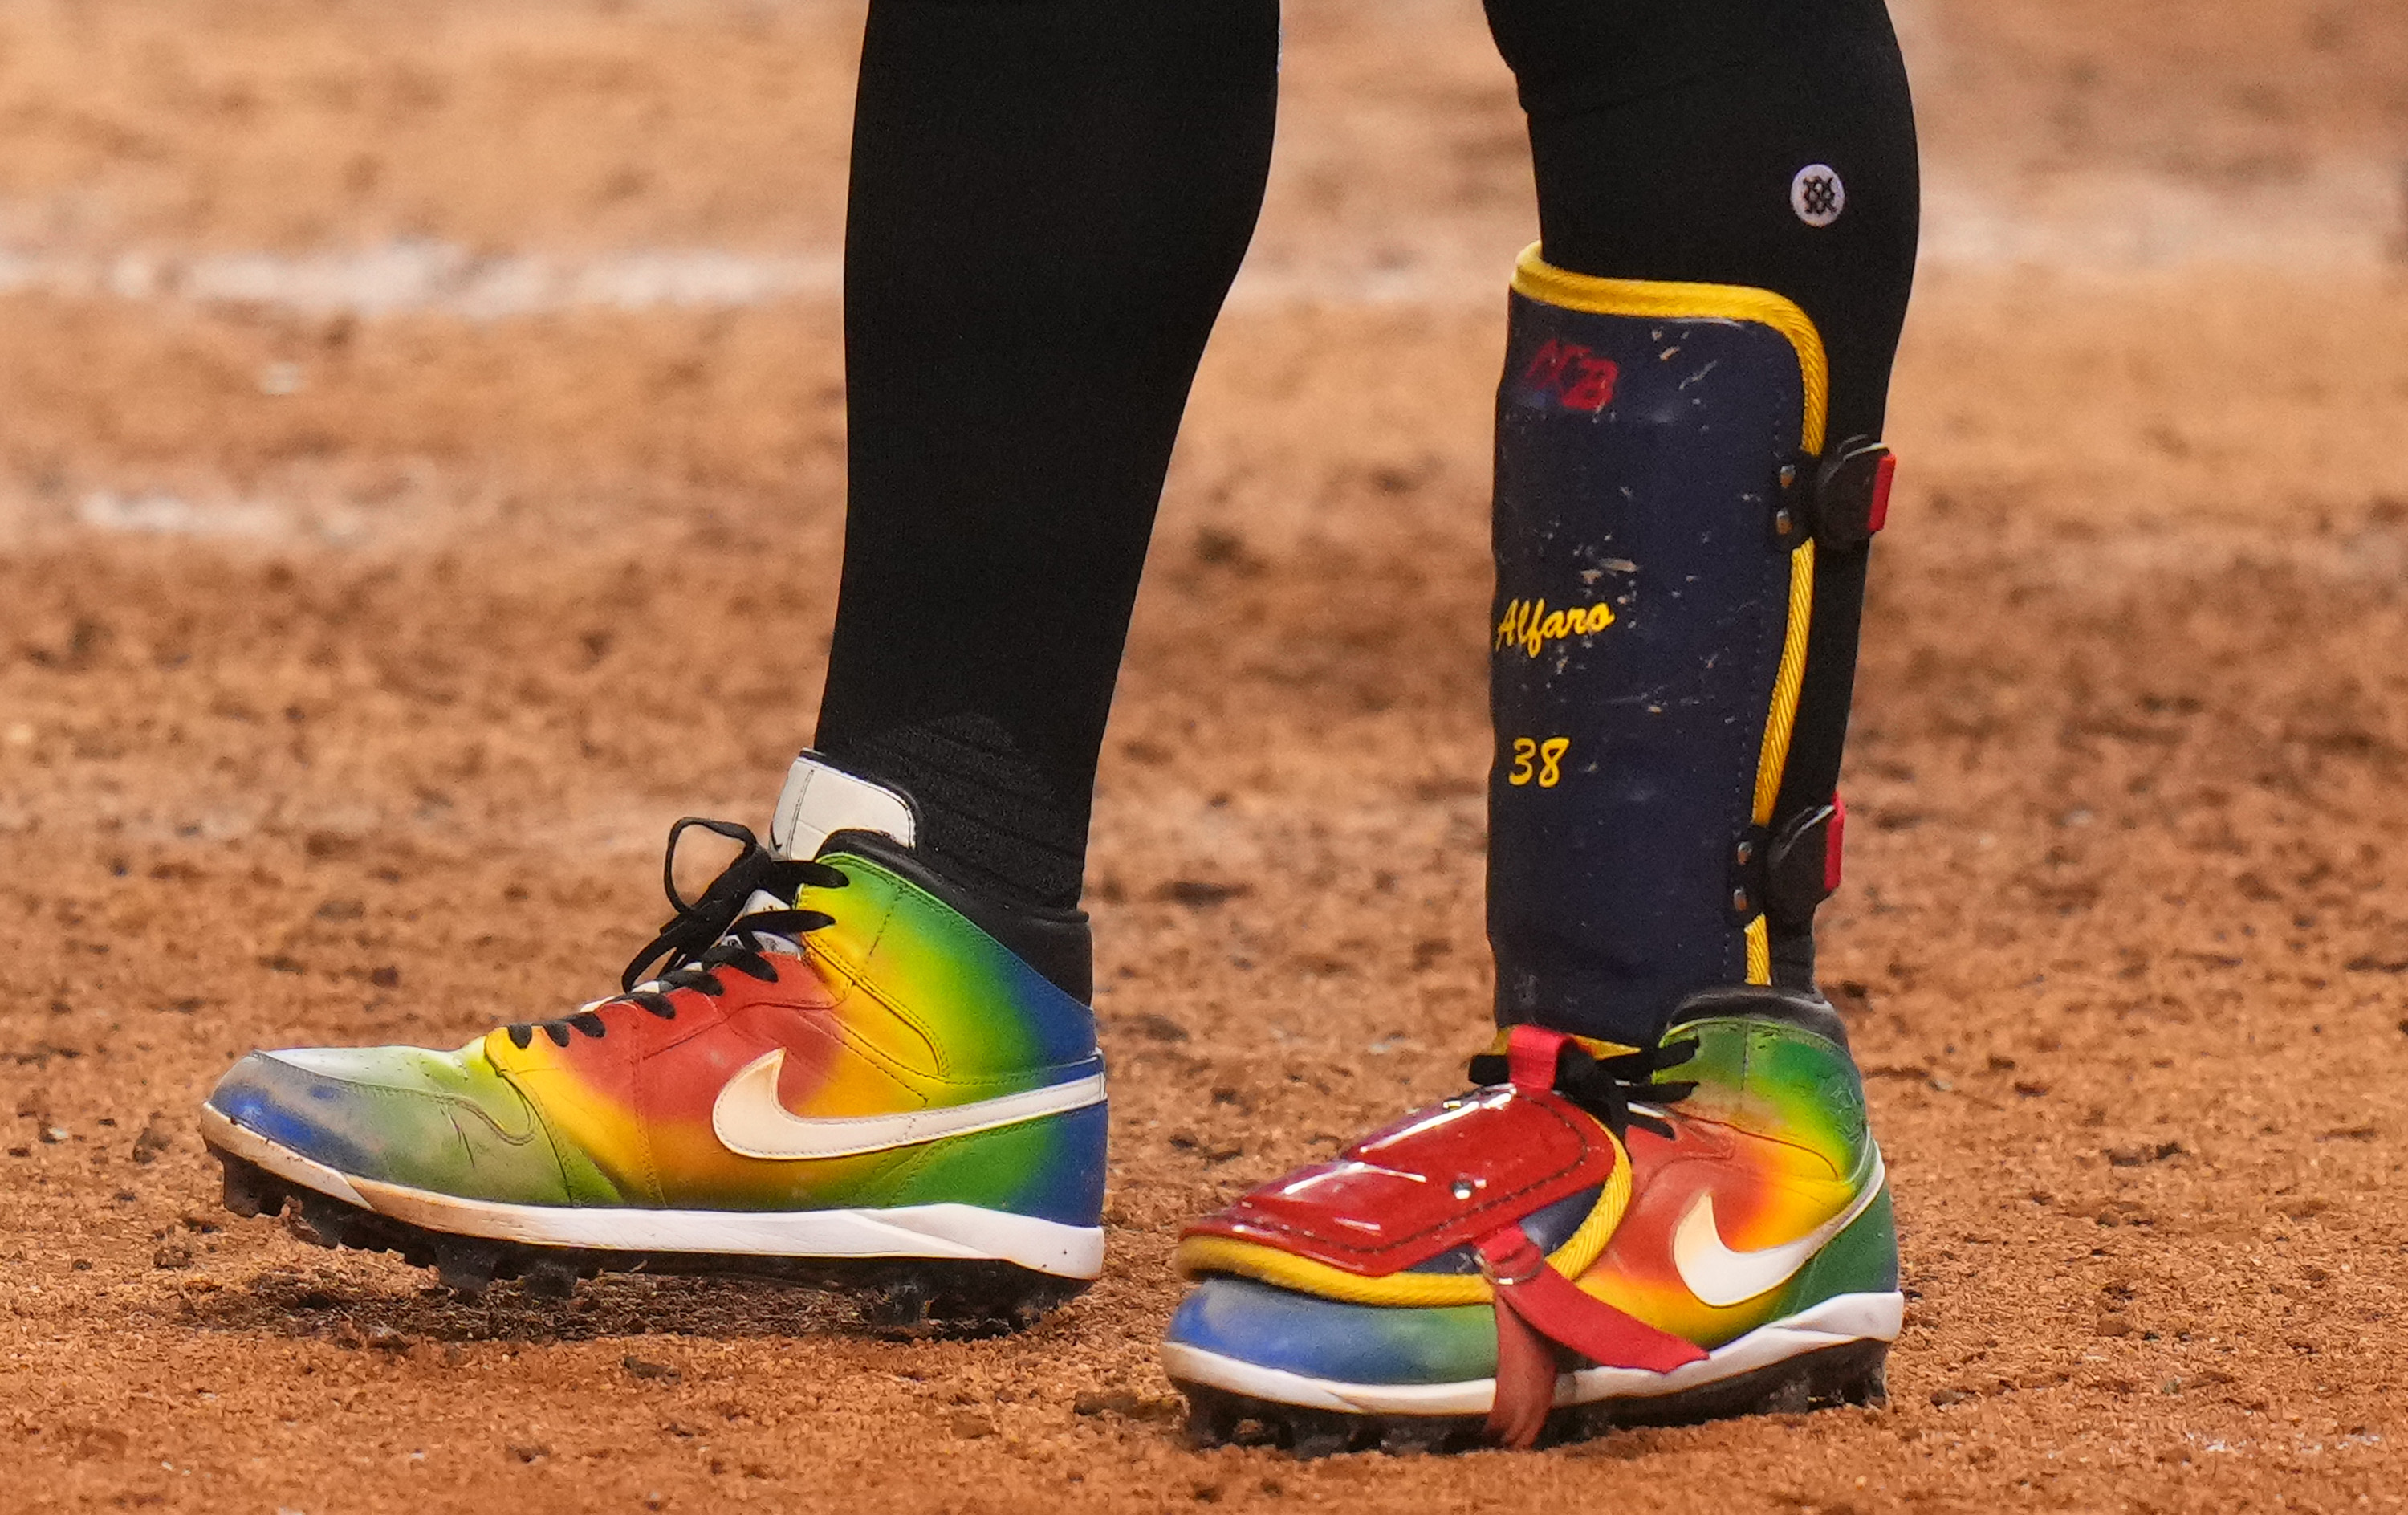 Pride-colored cleats worn by Jorge Alfaro of the Miami Marlins